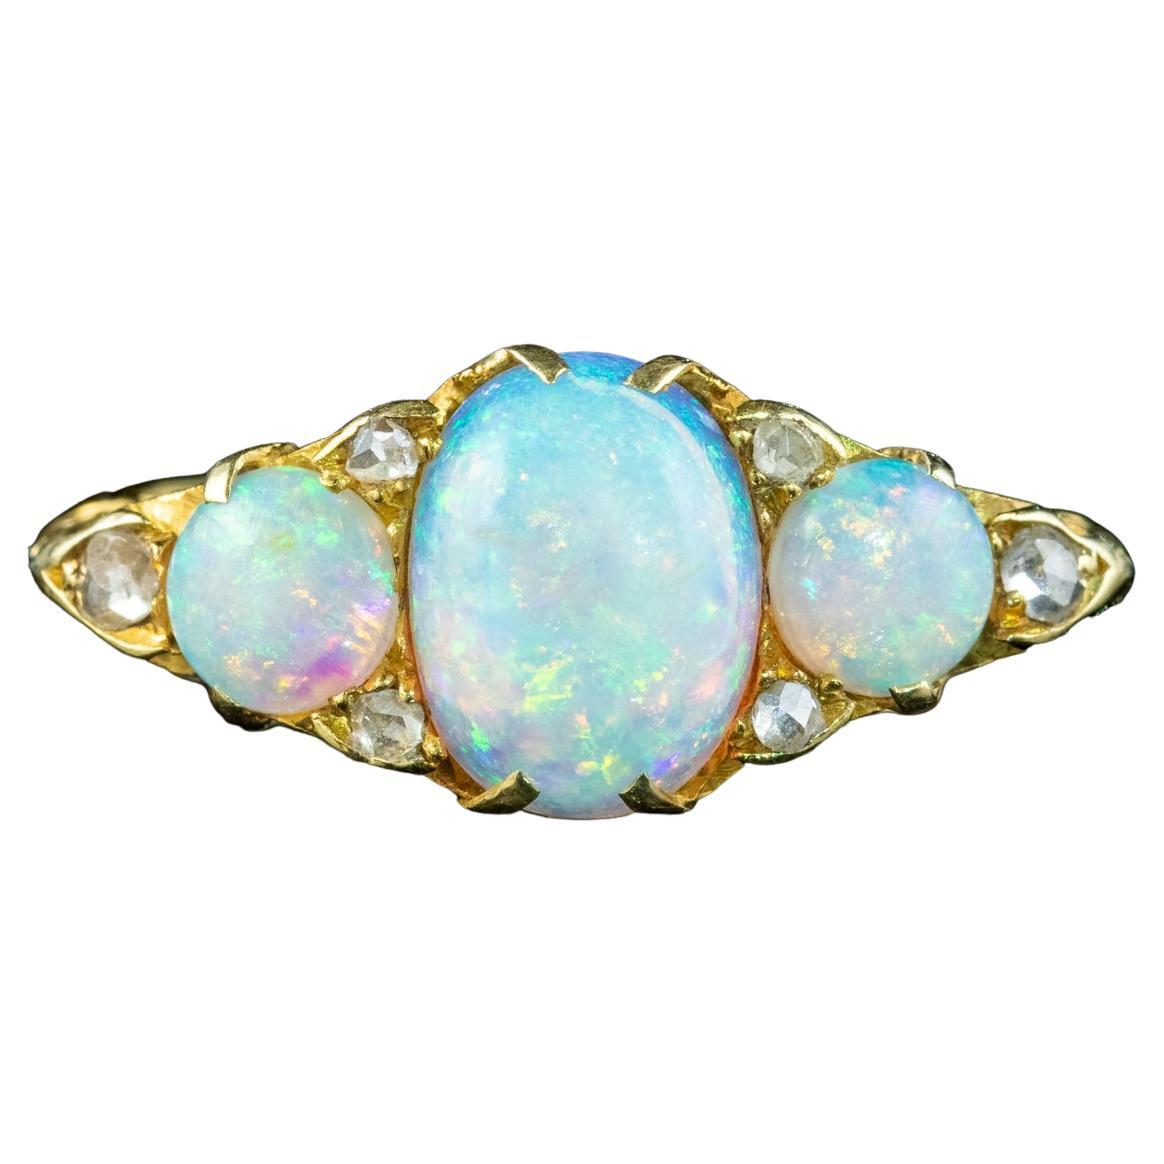 Antique Edwardian Opal Diamond Ring 2.5ct of Opal For Sale